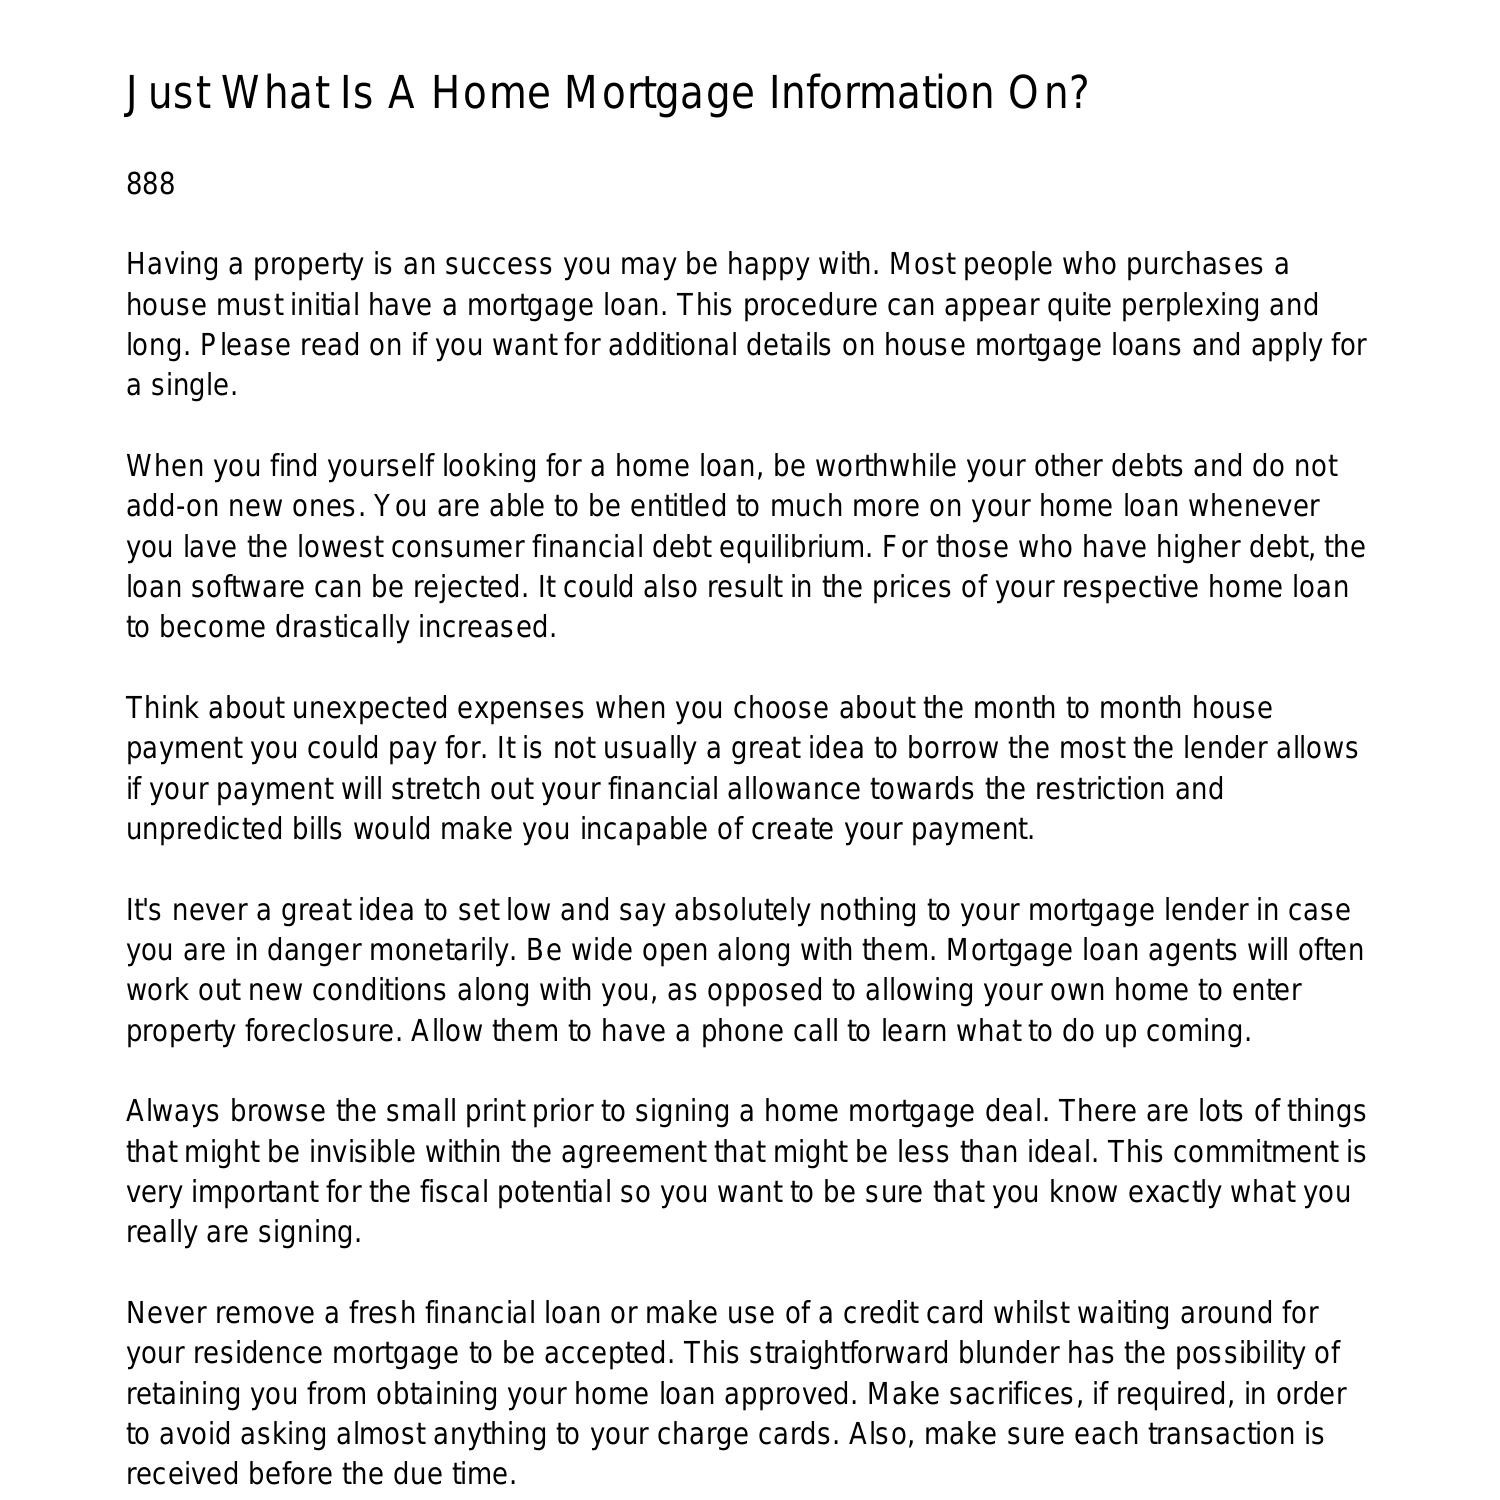 just-what-is-a-mortgage-information-onizmom-pdf-pdf-docdroid